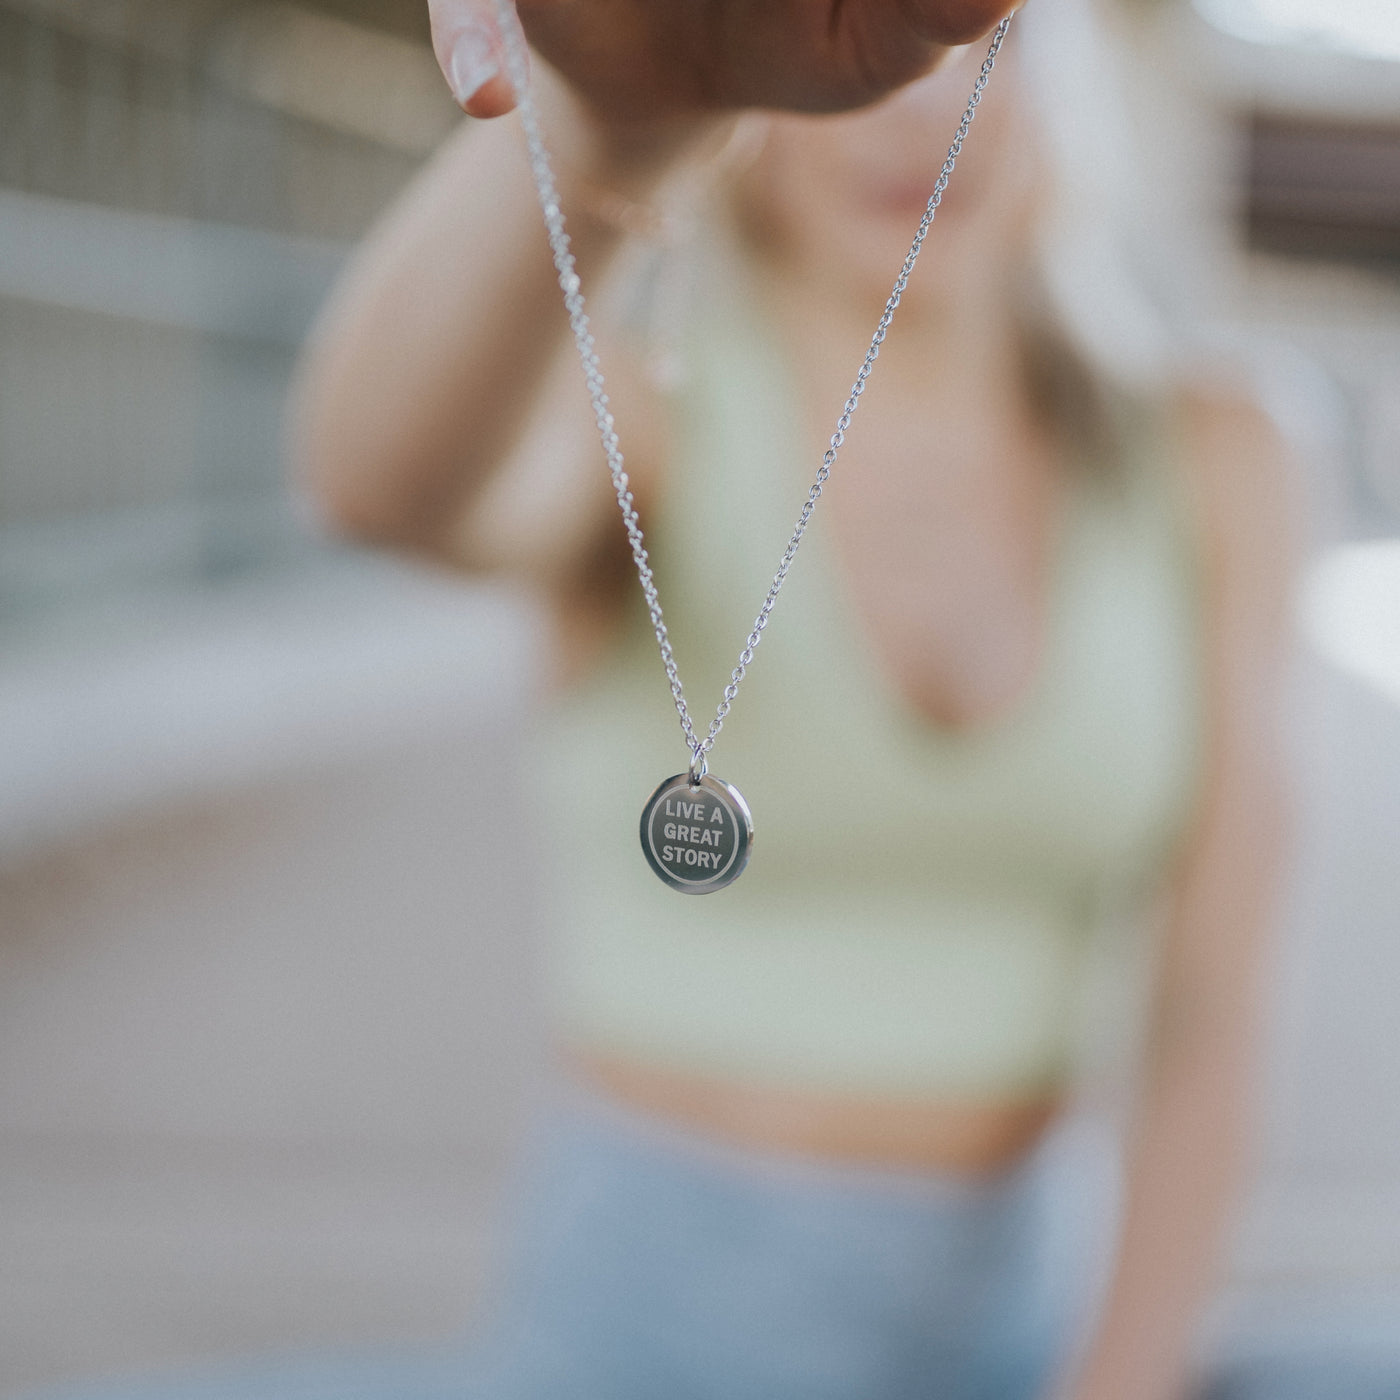 LIVE A GREAT STORY Necklace